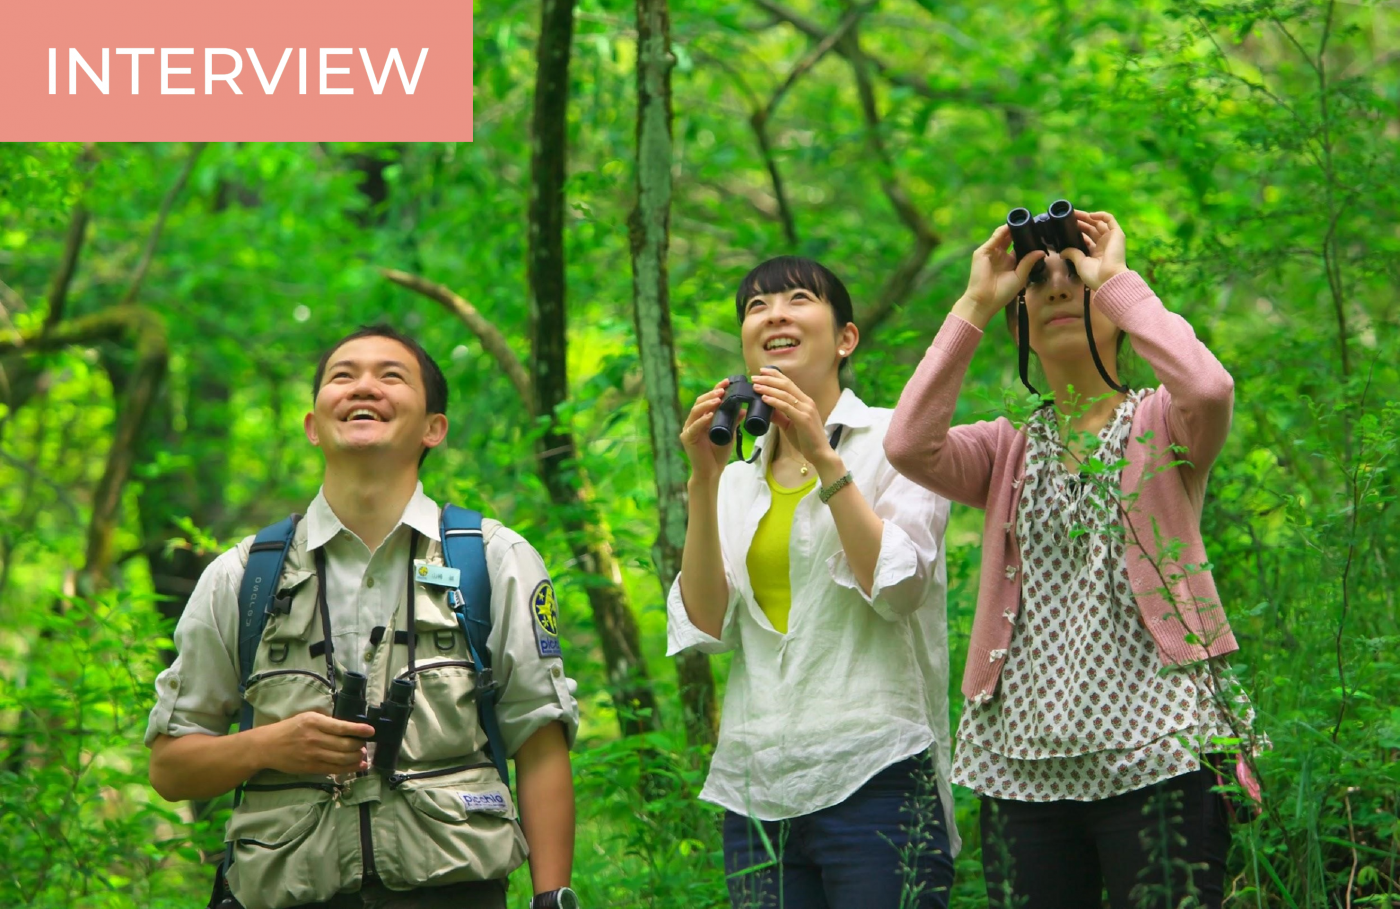 Wrap skud Byttehandel Discover Japan's National Parks and Nature Conservation: Interview with a  Picchio Eco Tour Guide - Kokoro Media